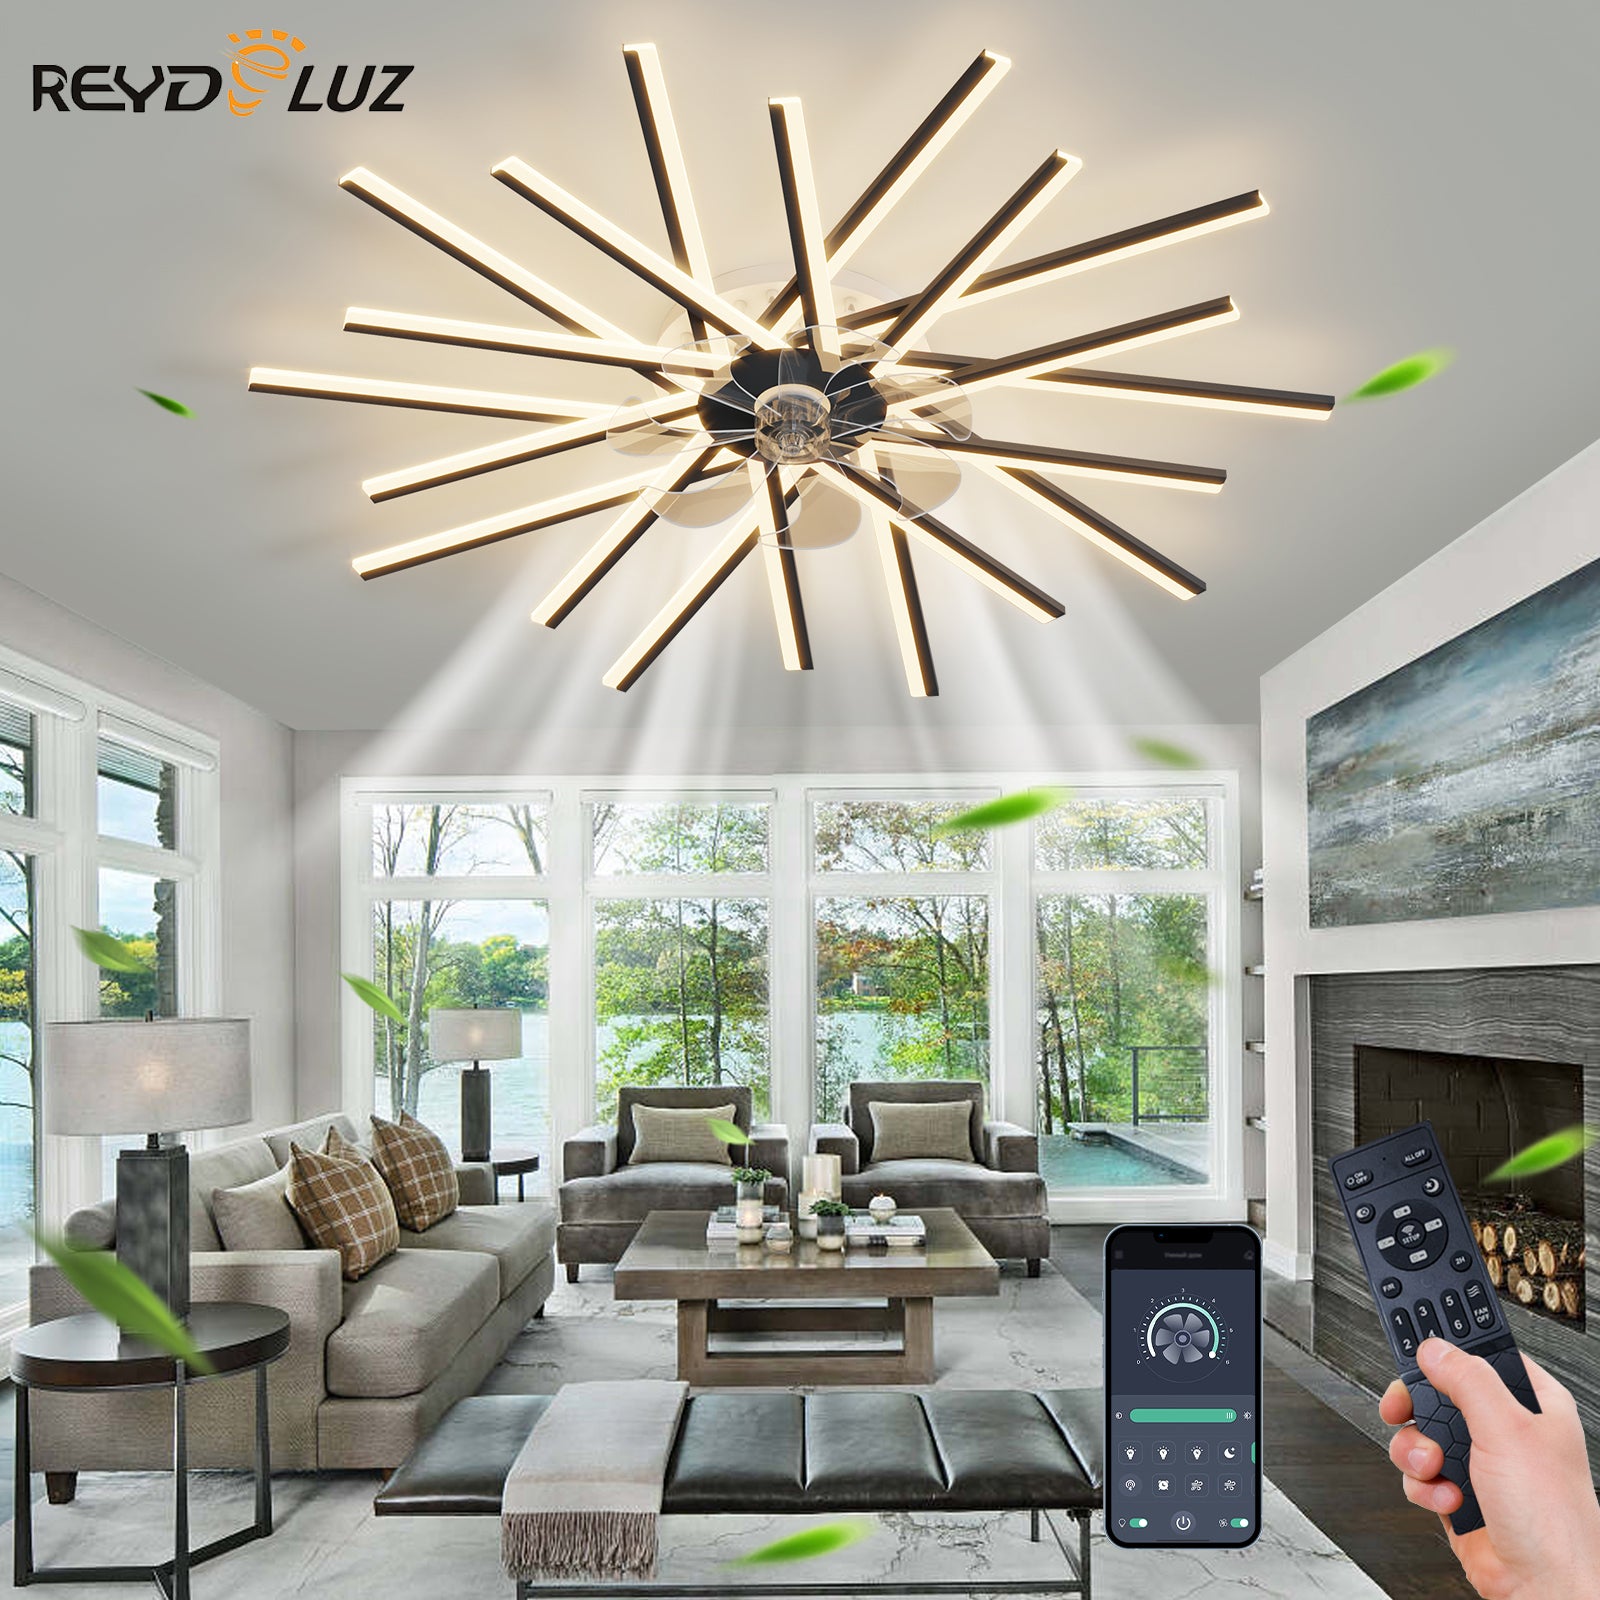 REYDELUZ Ceiling Fan with Lights, Led Ceiling Fan Bedroom Ceiling Lamp Remote Control 3 Colors Switching Dimming Intelligent 6 Wind Speed Living Room Fan Ceiling Lamp.